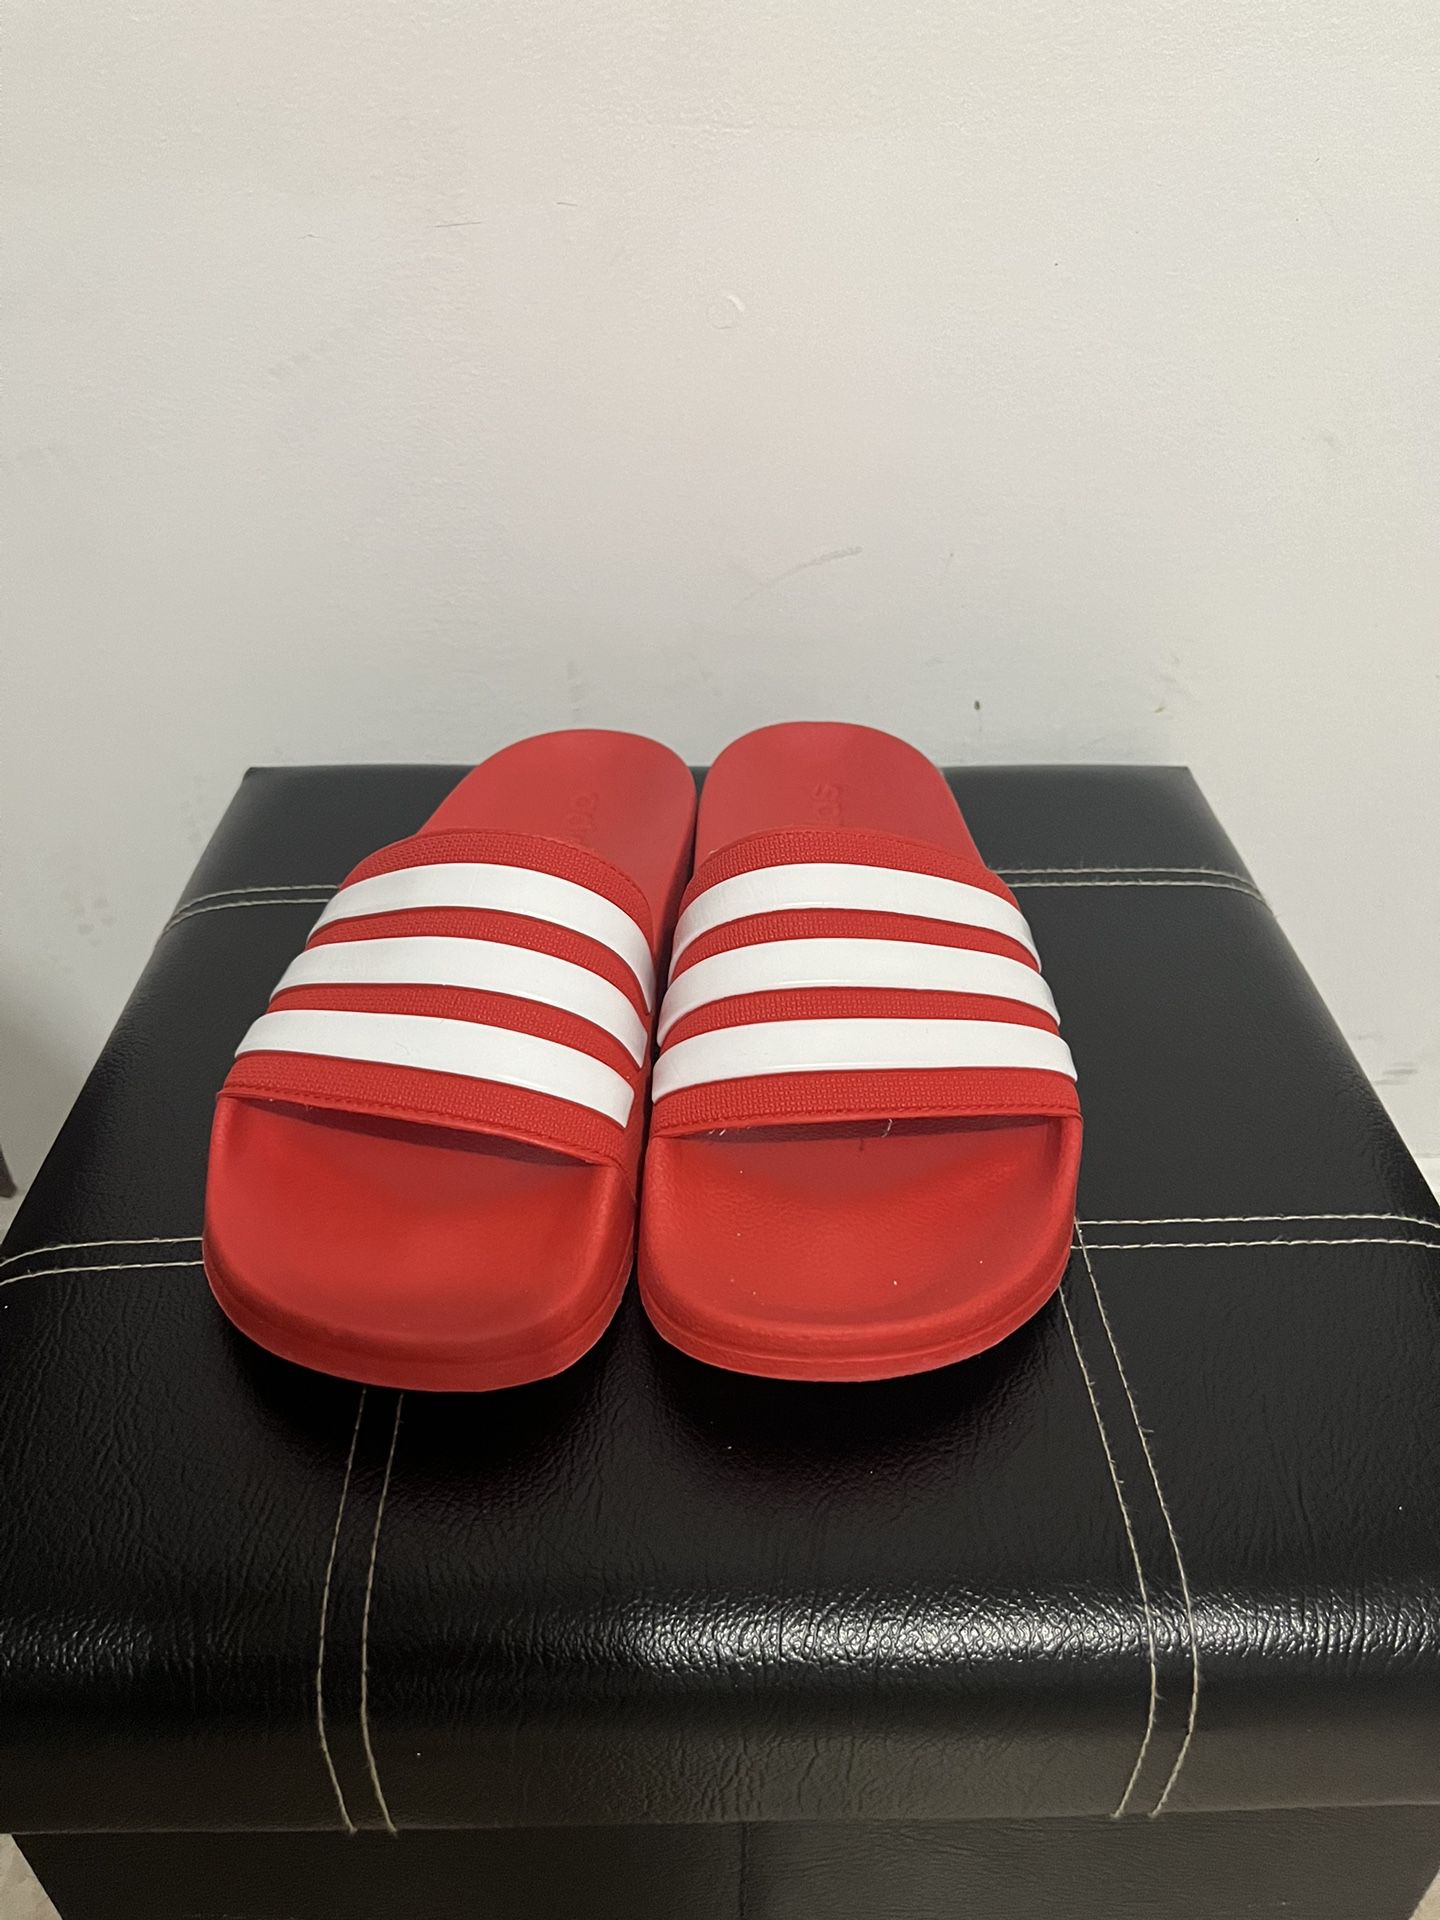 Adida Sandals Man Size 8 In Excellent Condition $50 Take Both 